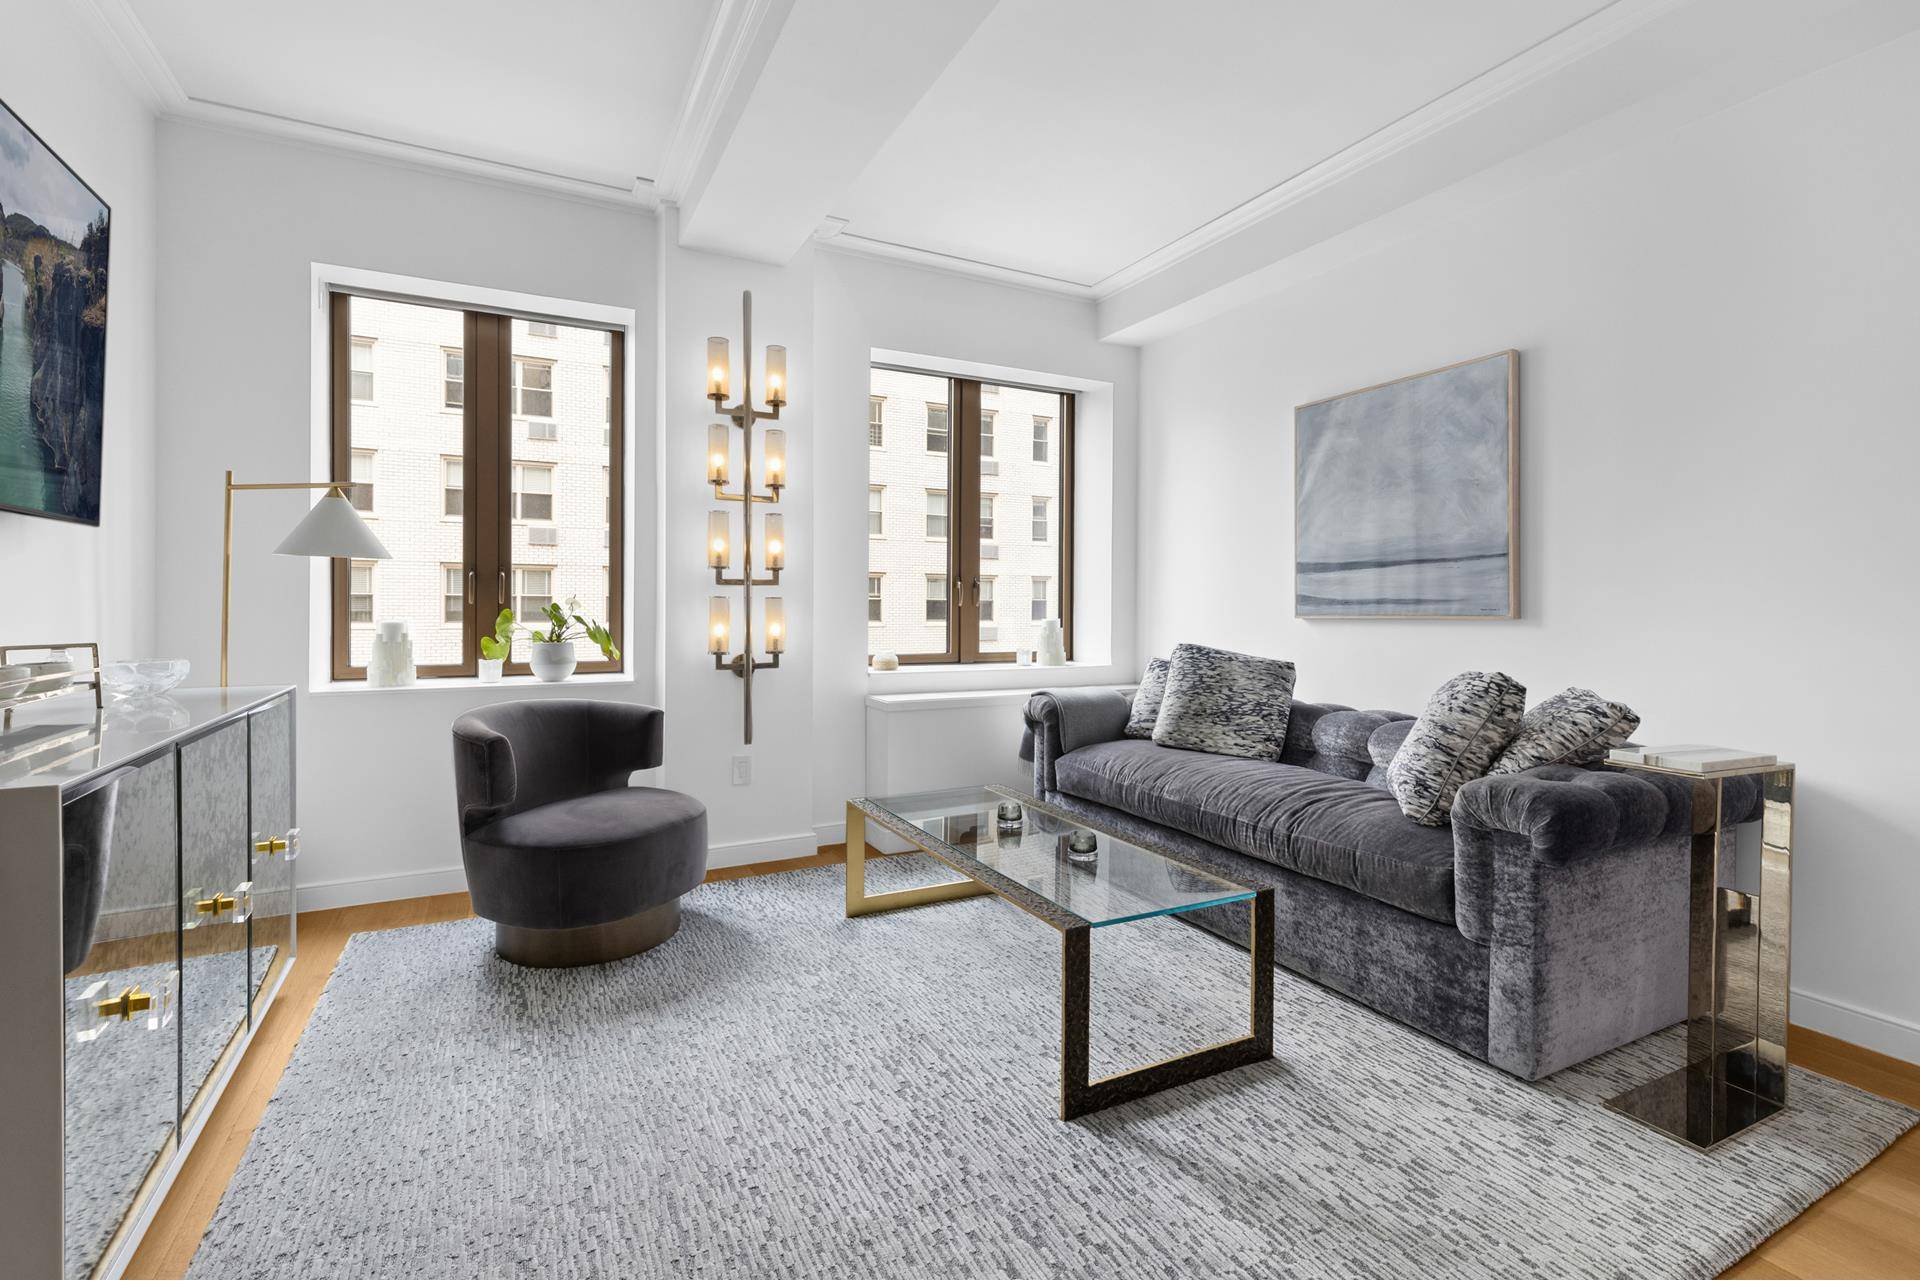 Rarely available south facing one bedroom at the coveted Gramercy Square condominium.